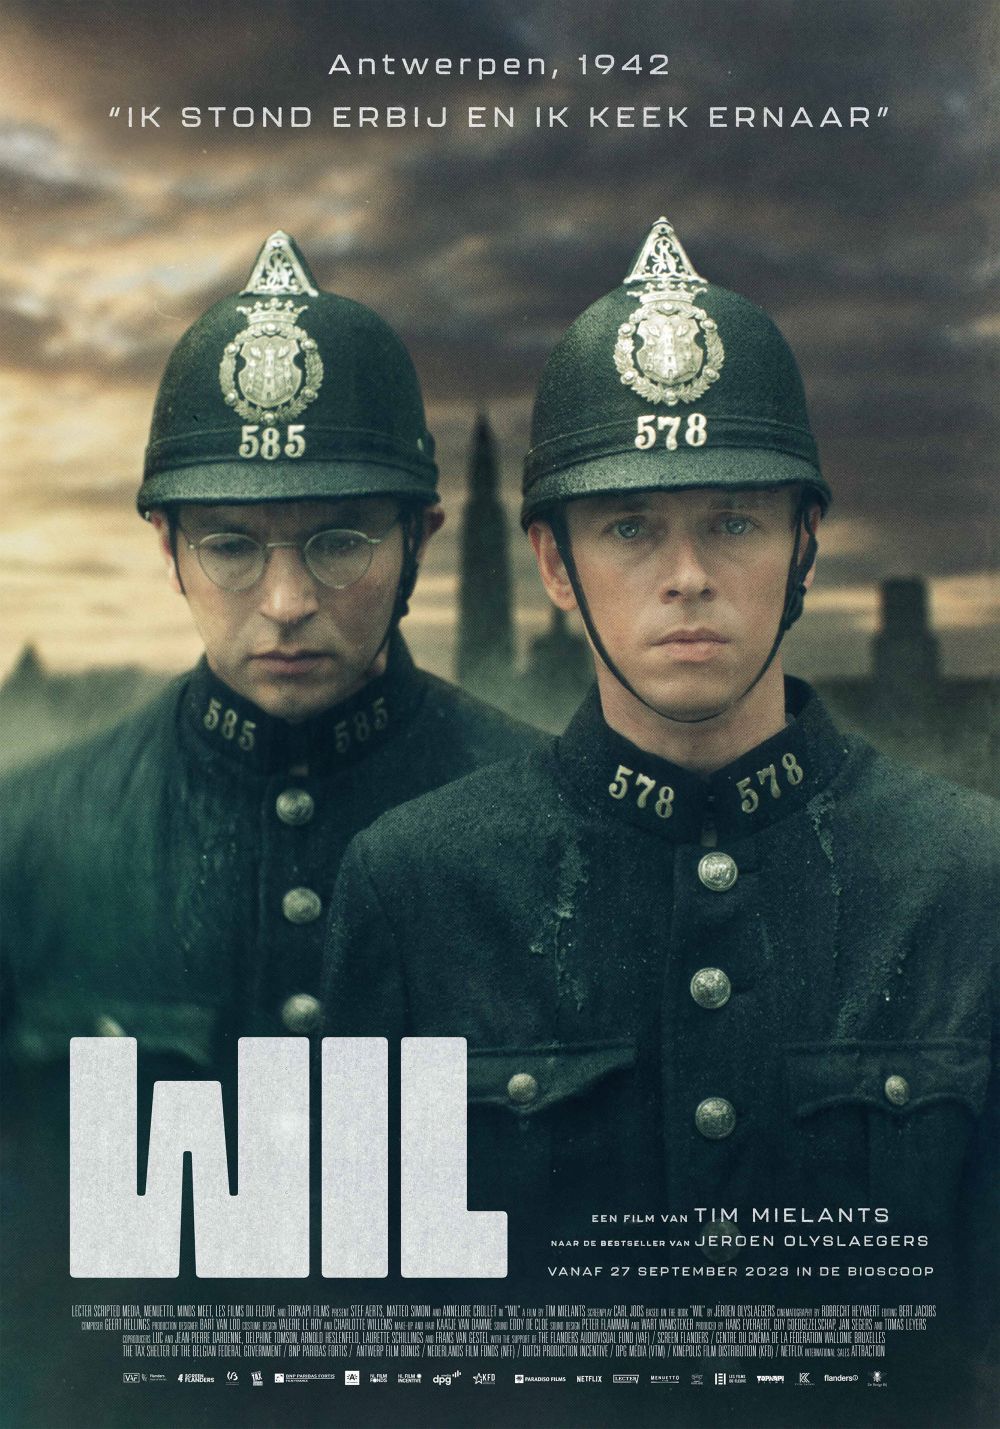 WiL (January 31) - Streaming on NetflixWiL is set during the early years of World War II in Antwerp, unfolding the story of Wilfried Wils, an auxiliary policeman struggling to survive amid escalating violence and distrust in the Nazi-occupied city. The narrative examines the moral and ethical challenges Wilfried faces as he navigates a path through a time of great peril and ambiguity. Based on the book by Jeroen Olyslaegers, the film offers a compelling exploration of survival during one of history's darkest periods.